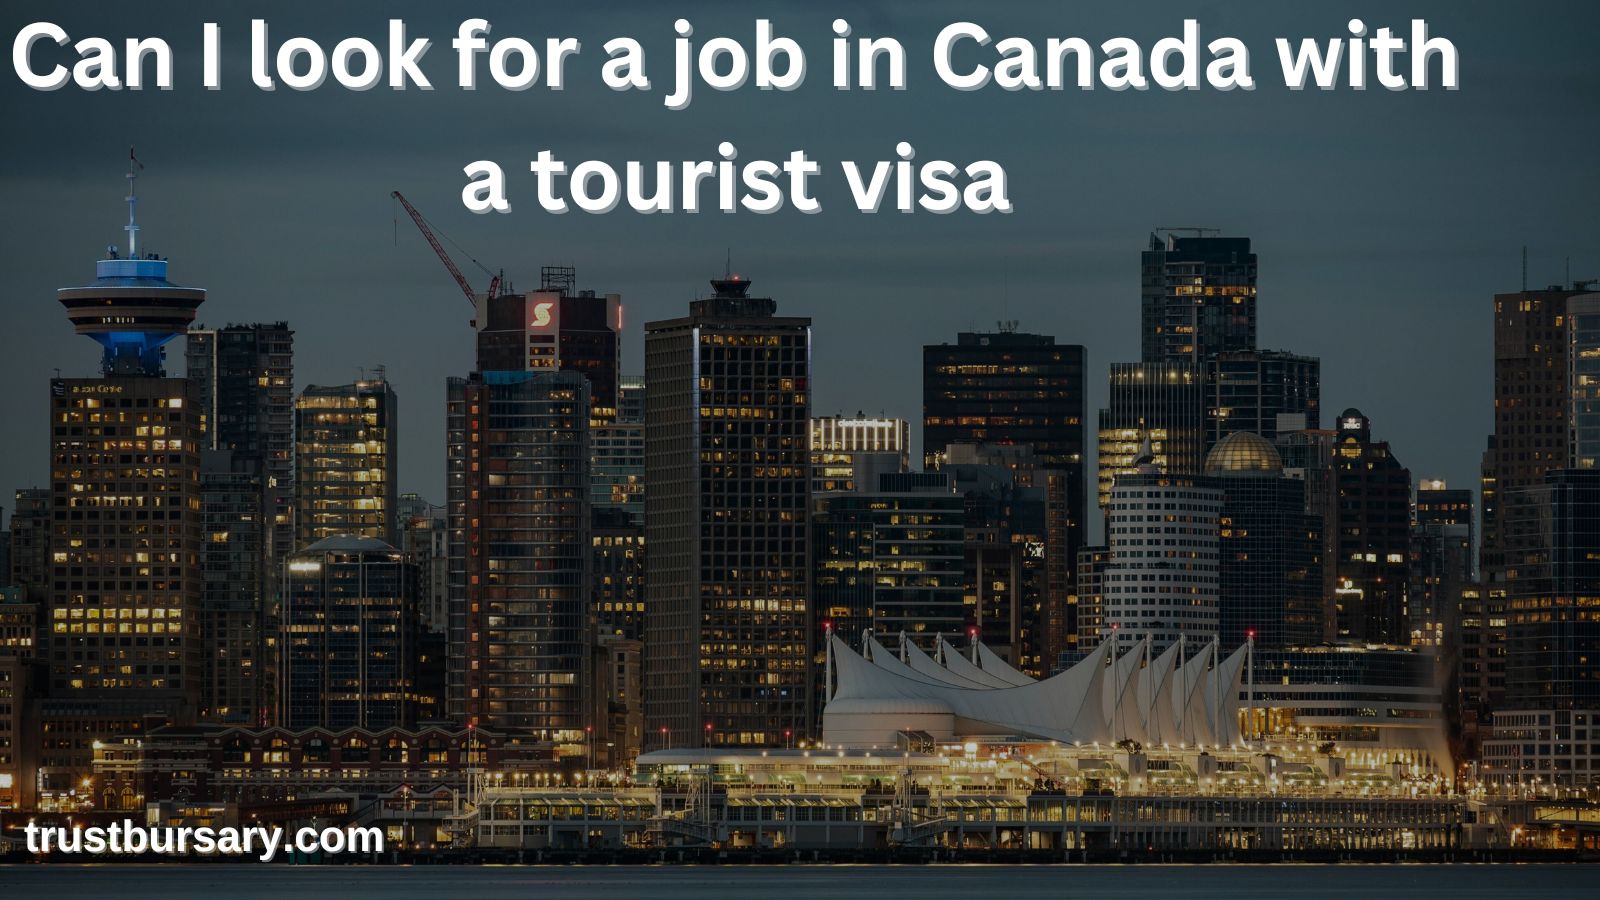 Can I look for a job in Canada with a tourist visa